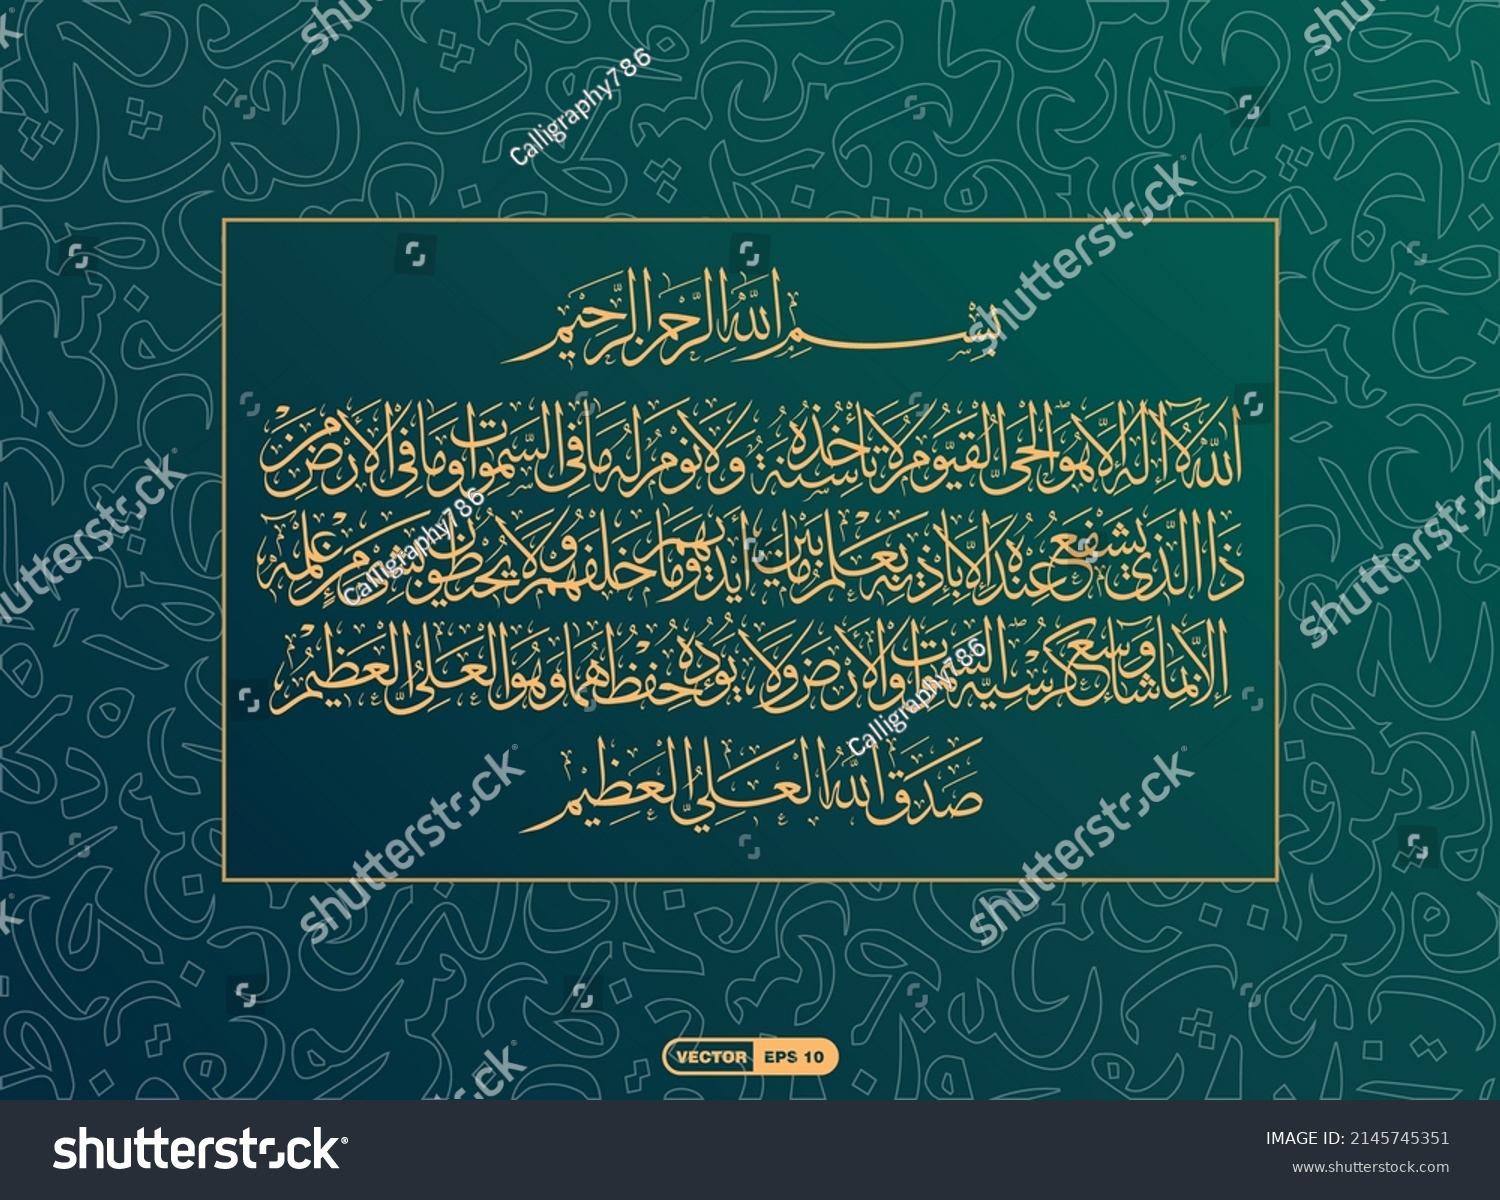 SVG of Arabic vector usable calligraphy of Surah Al-Baqarah (verse number 255) - AYAT UL KURSI, the English translation;   “Allah! There is no god but He – the Living, The Self-subsisting, Eternal...